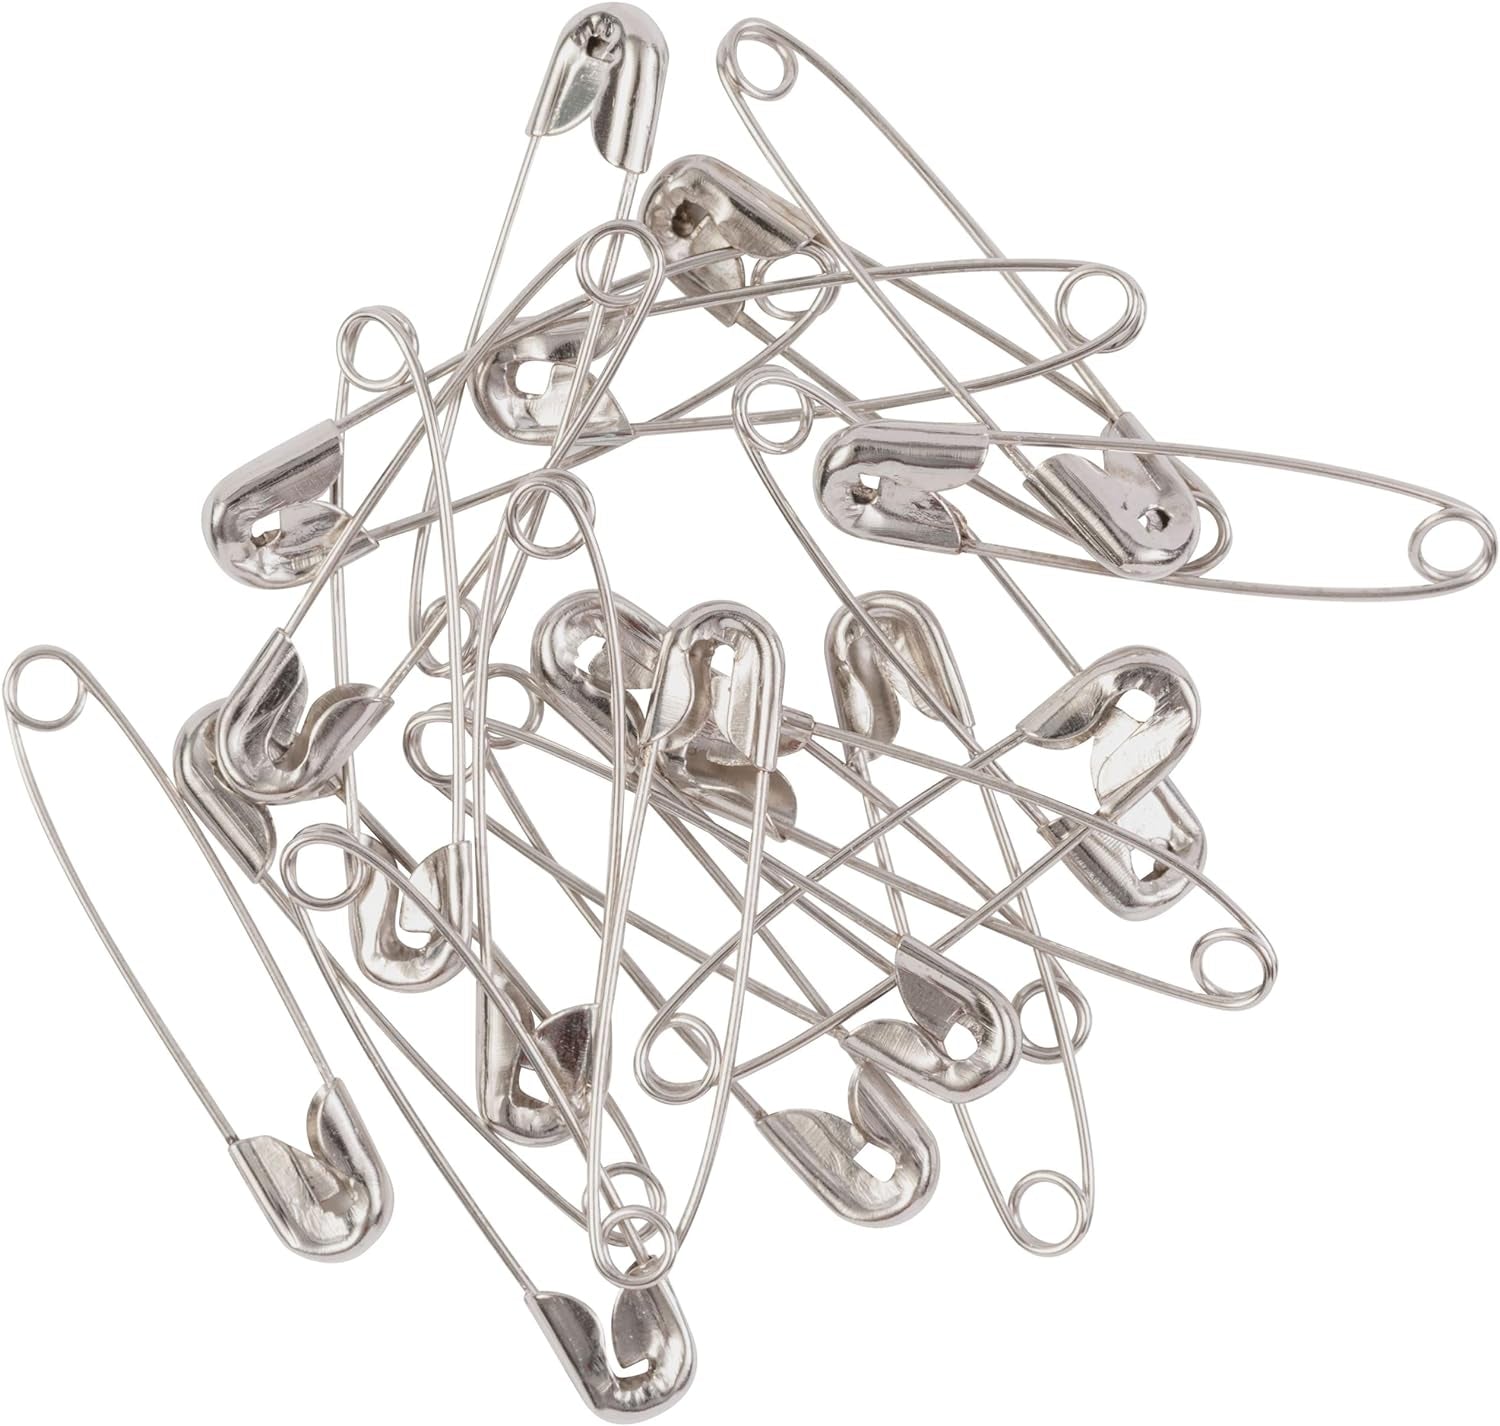 Assorted Safety Pins - Assorted 3-Size Safety Pin Set - Sewing Accessories and Supplies - 75-Piece